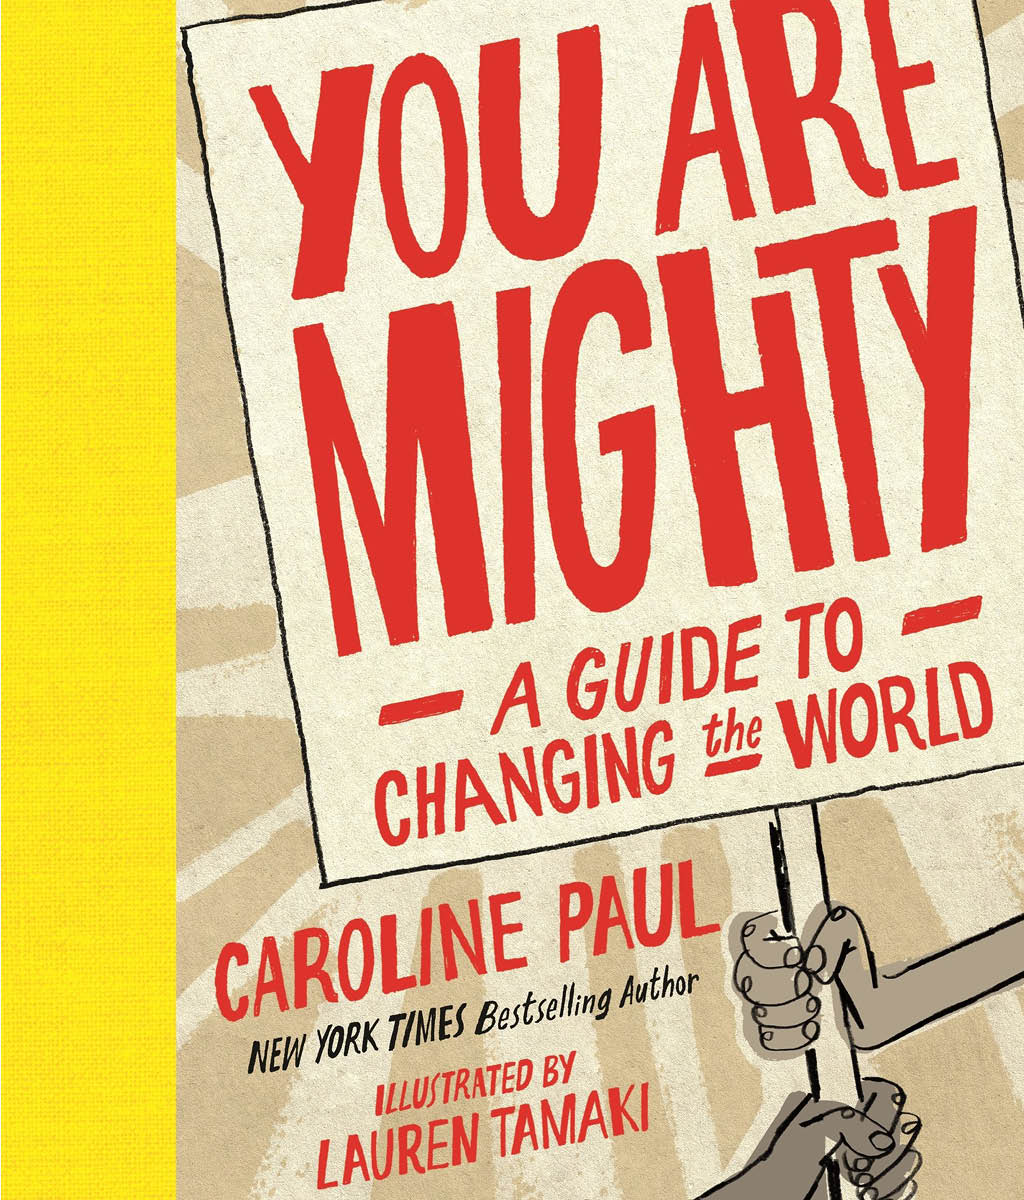 You Are Mighty: A Guide to Changing the World by Caroline Paul